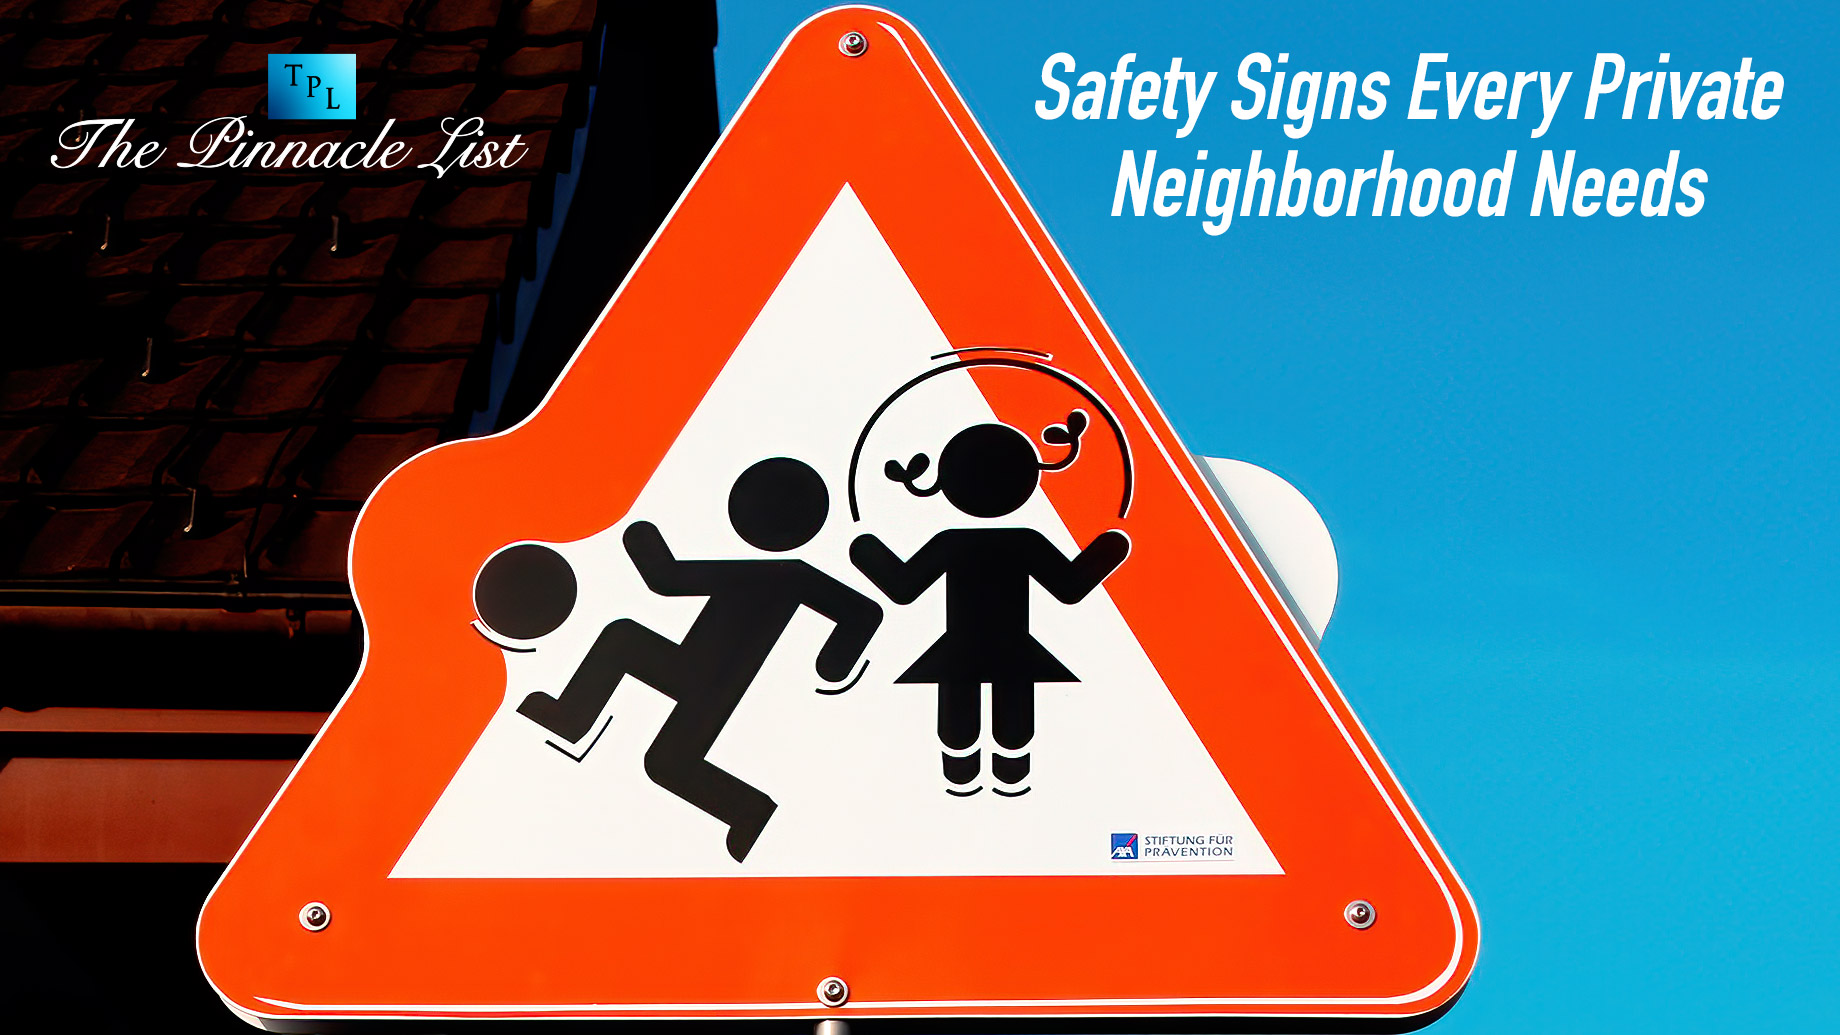 Safety Signs Every Private Neighborhood Needs